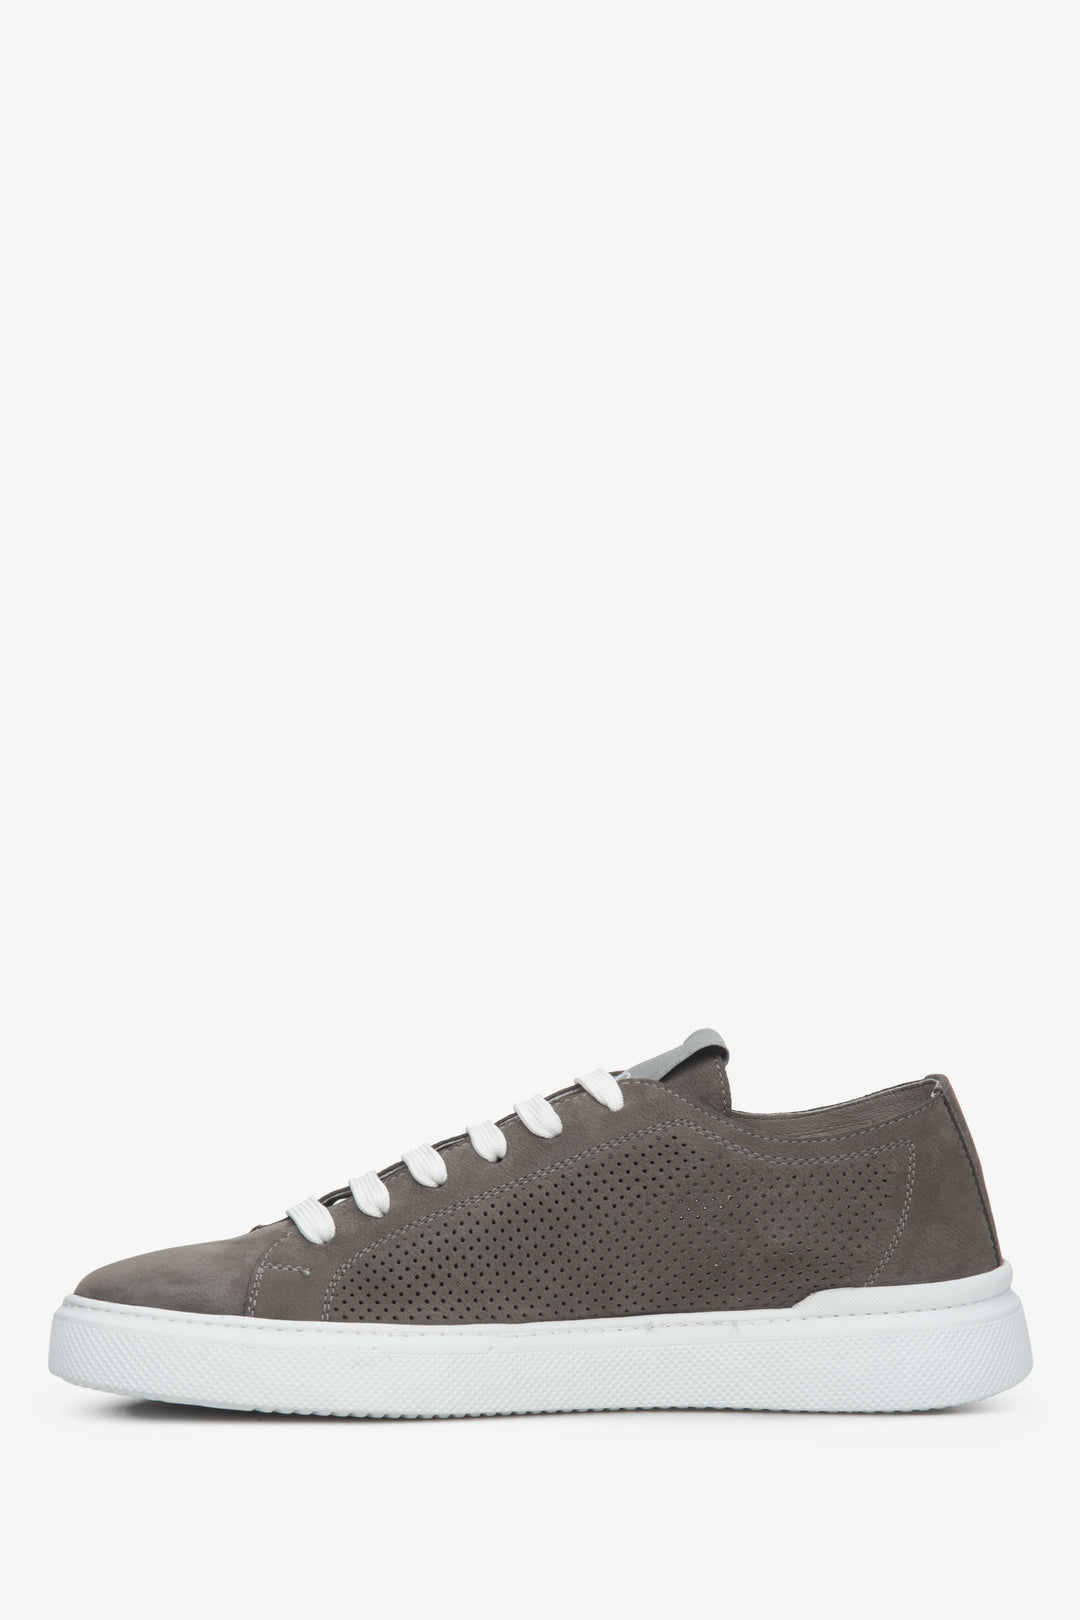 Men's grey natural leather perforated sneakers Estro.